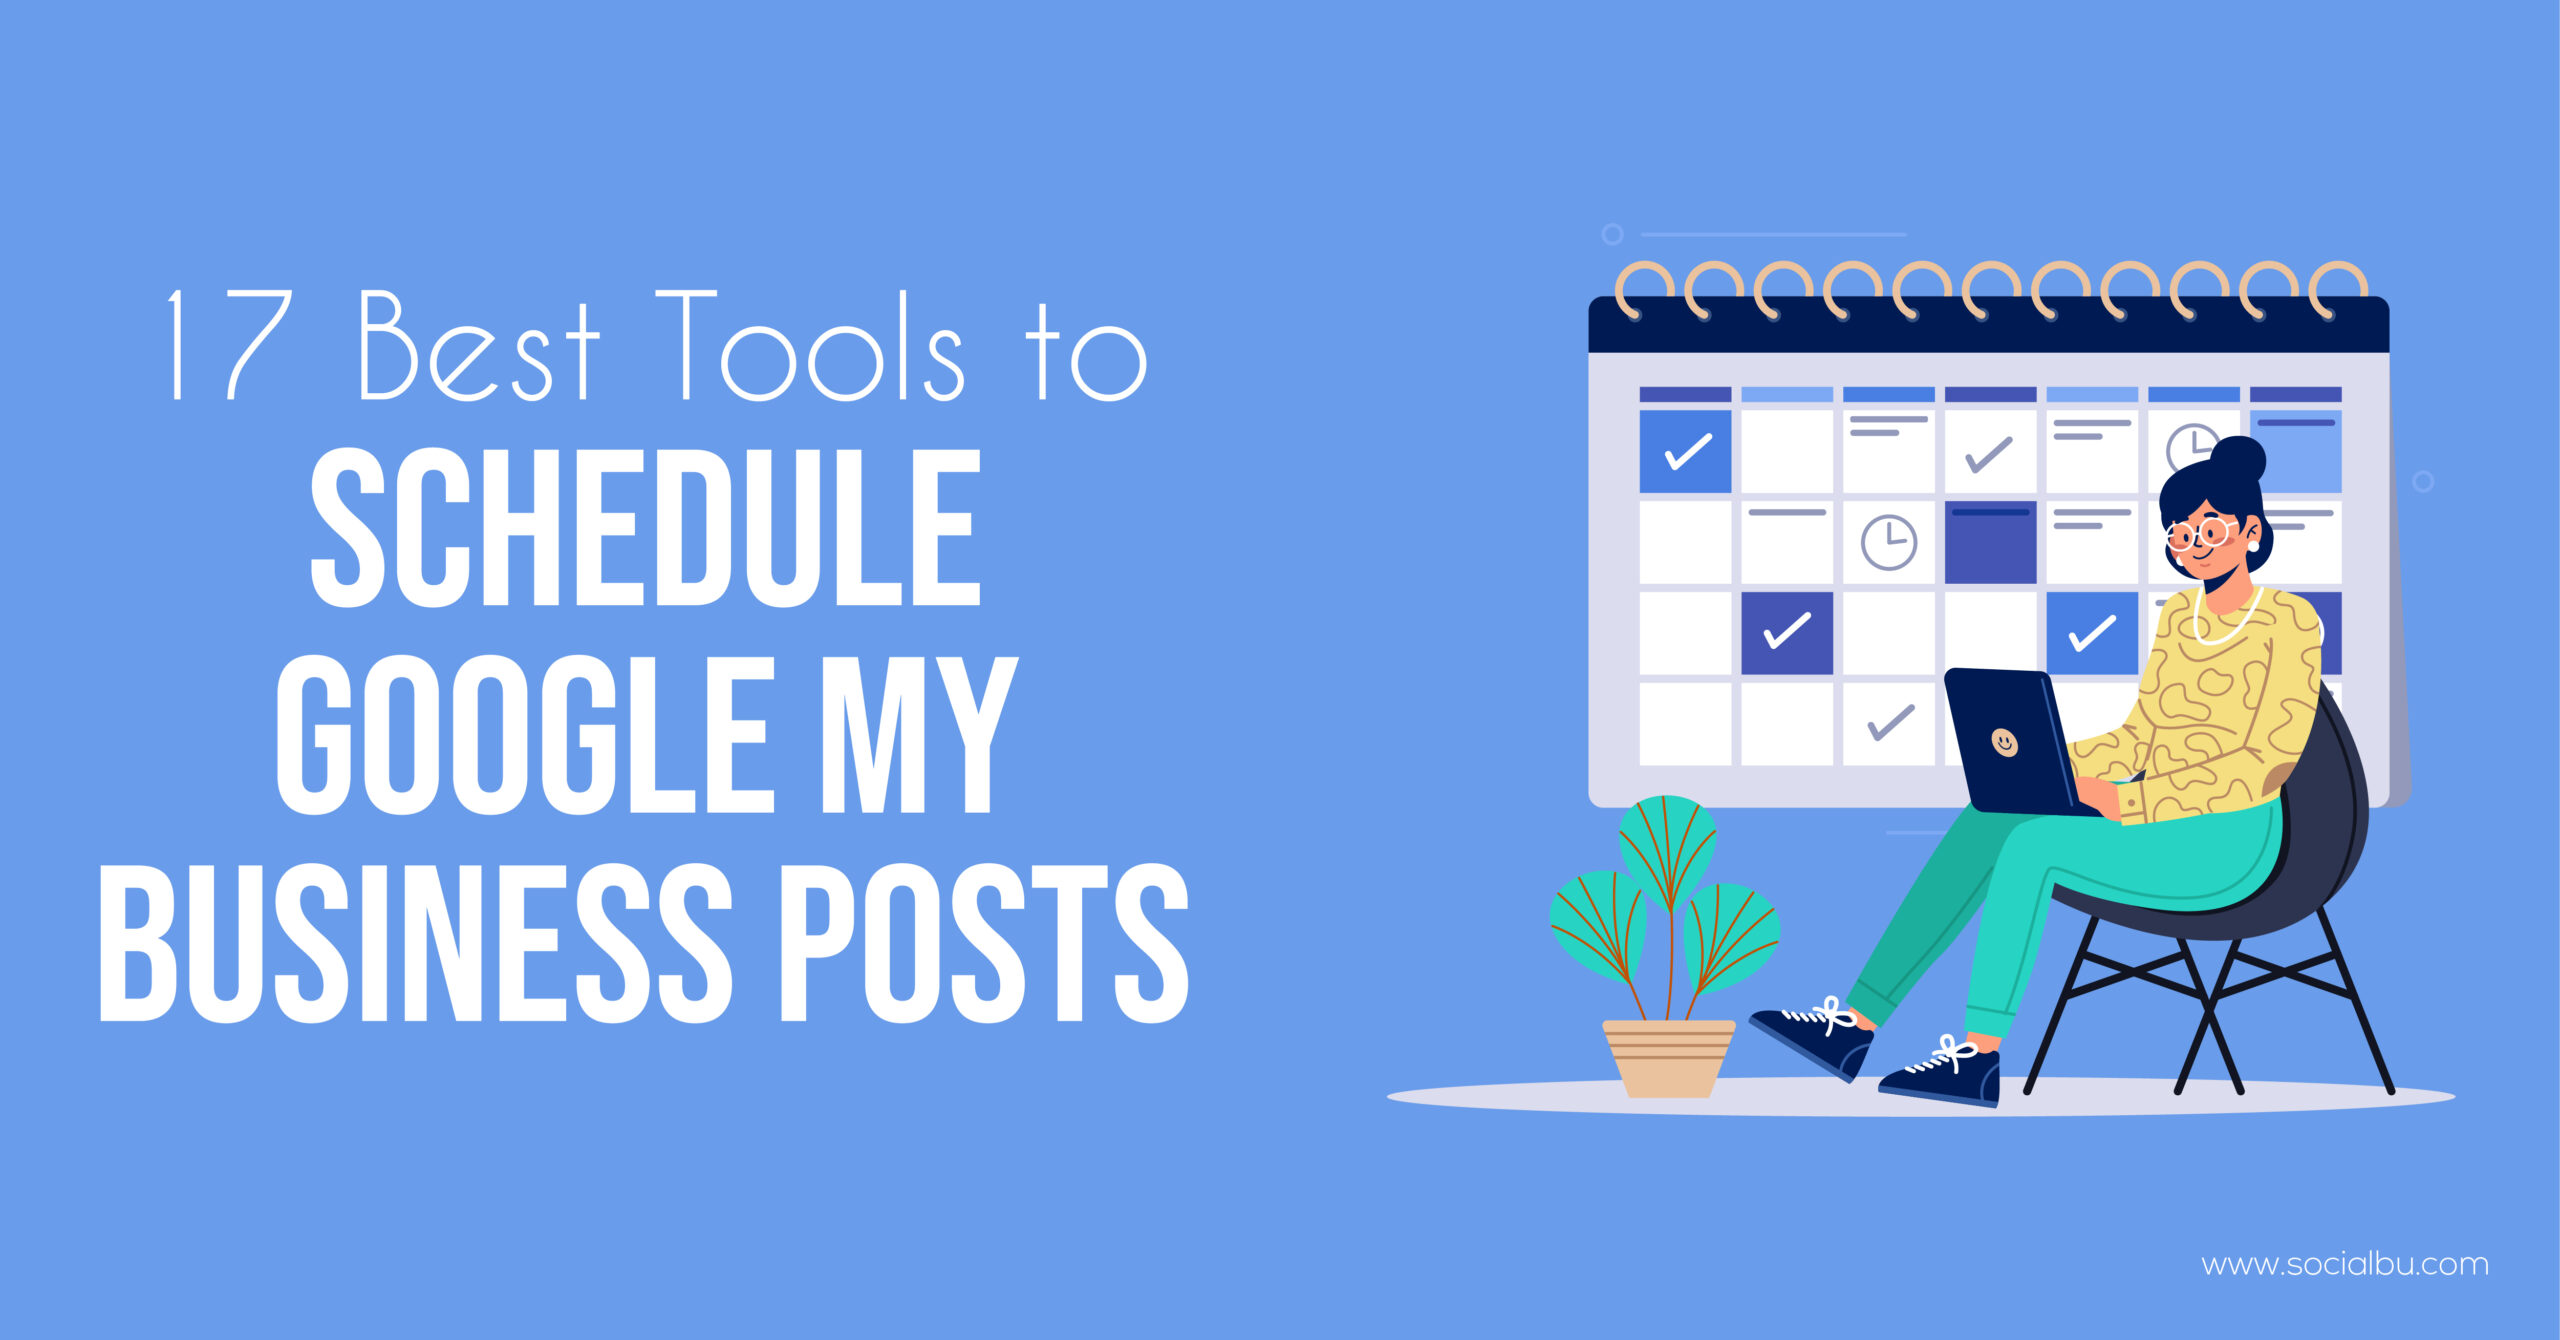 Best tools to schedule Google My Business posts